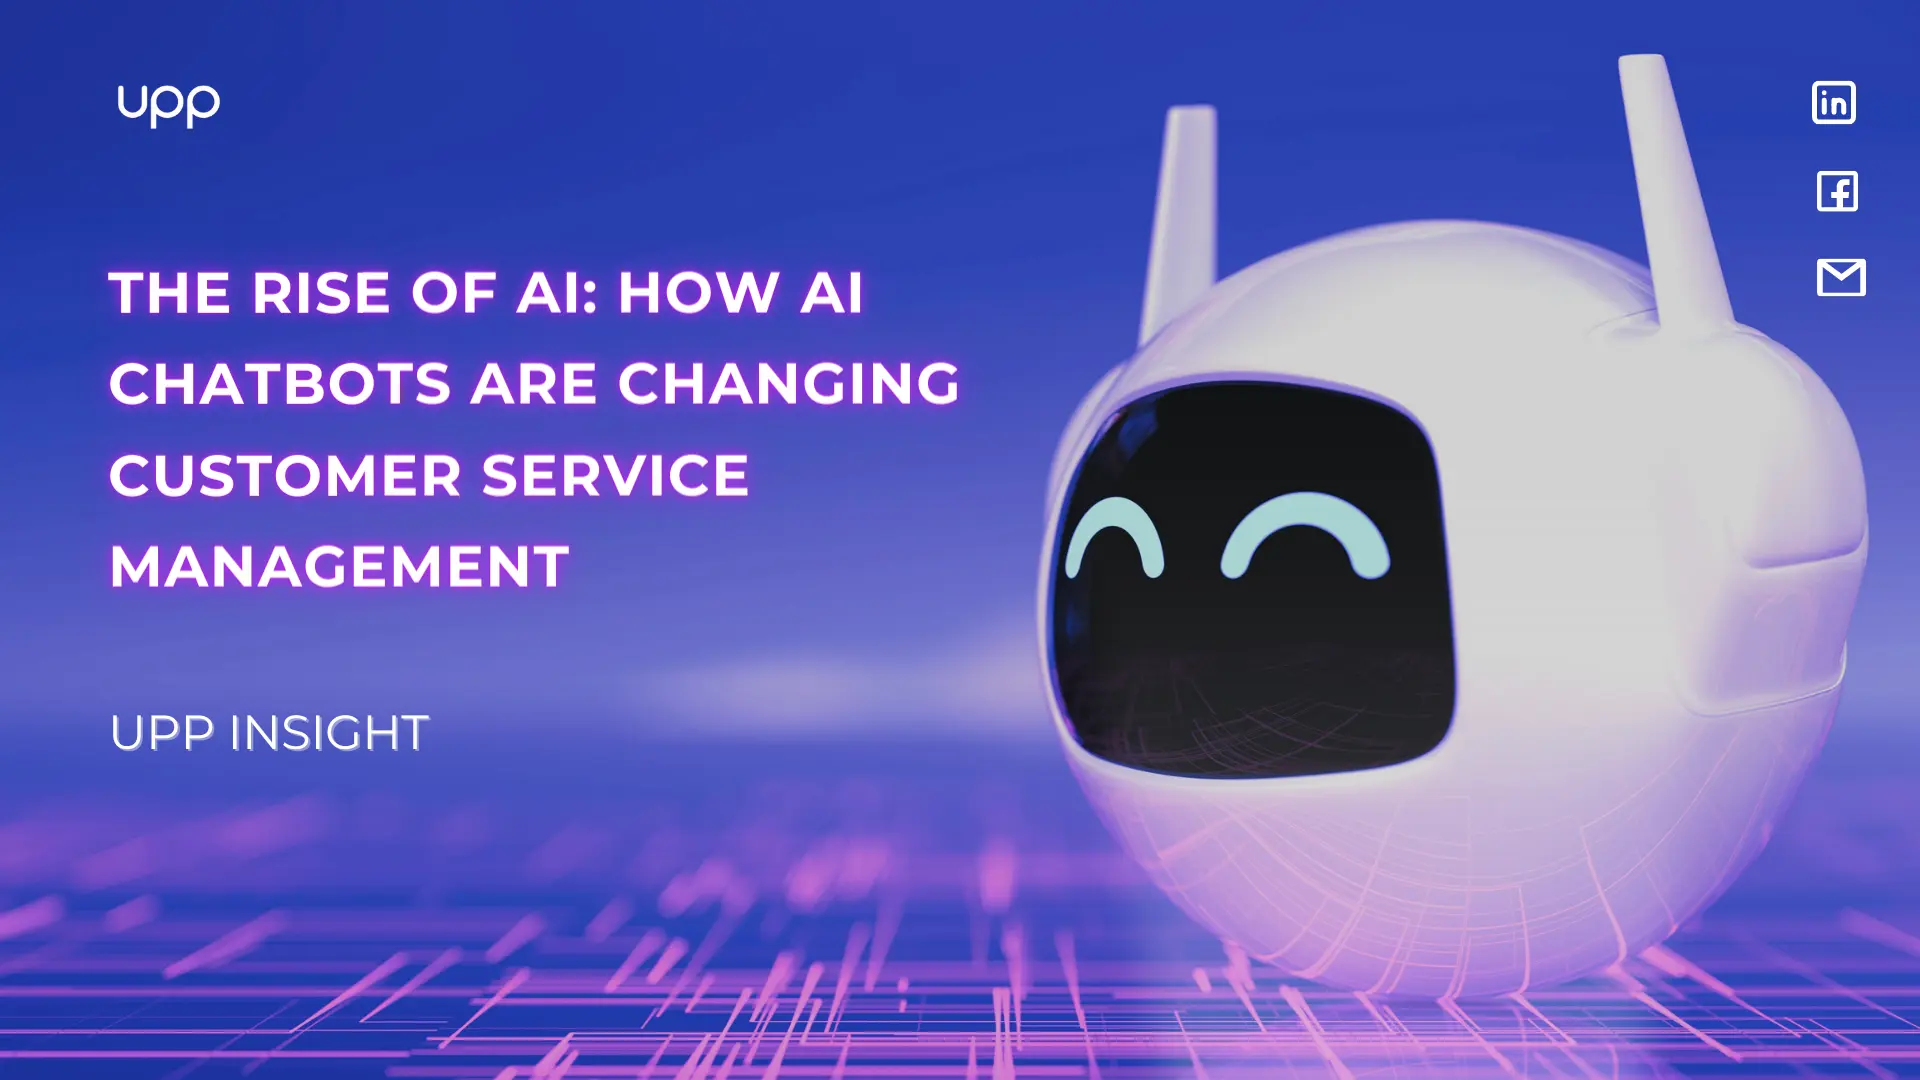 How AI chatbots are changing Customer Service Management